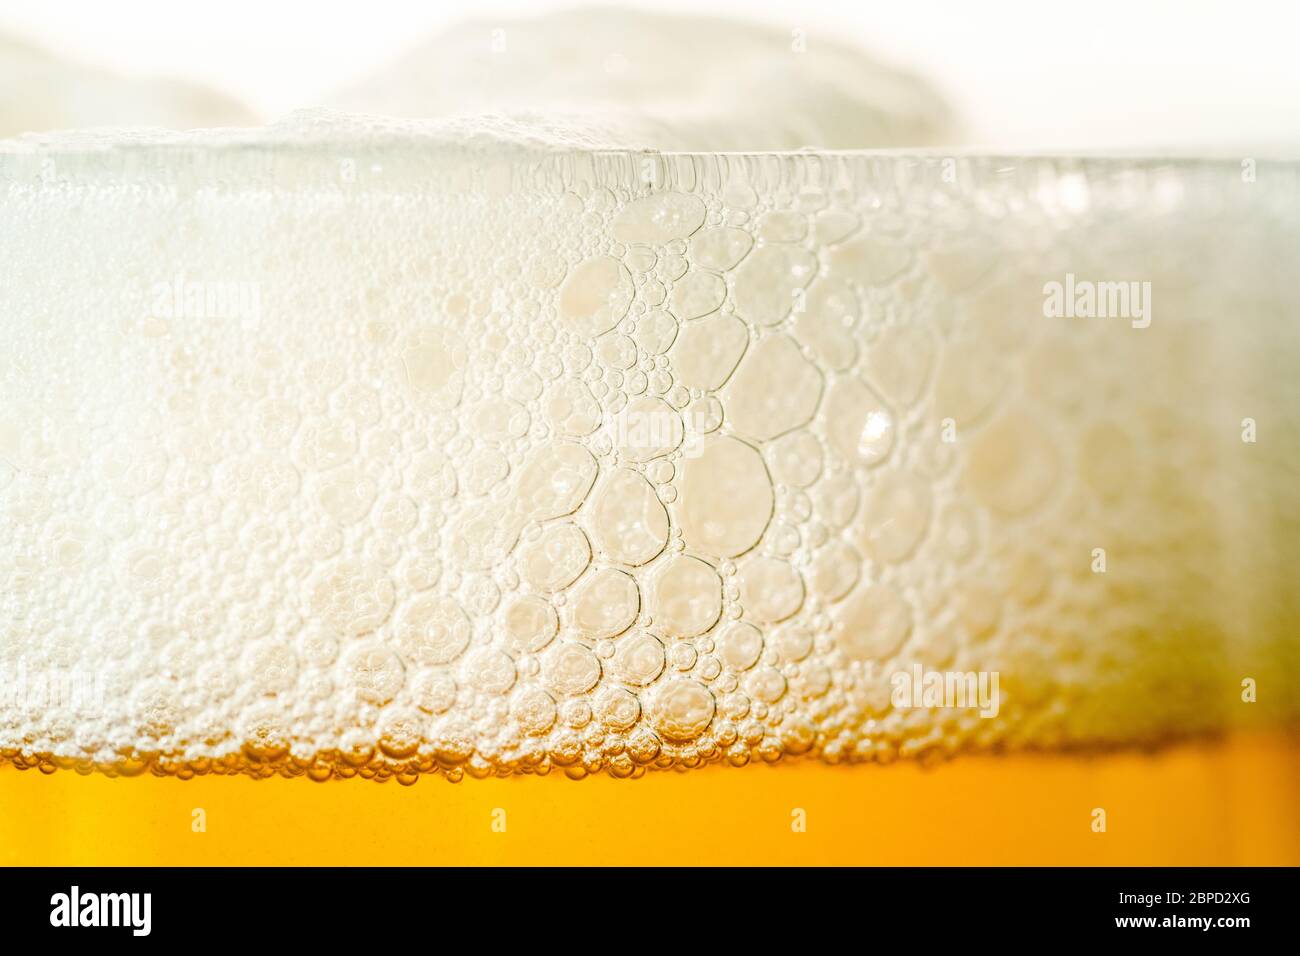 Craft beer glass with bubble froth close up, refreshing cold drink background. Stock Photo